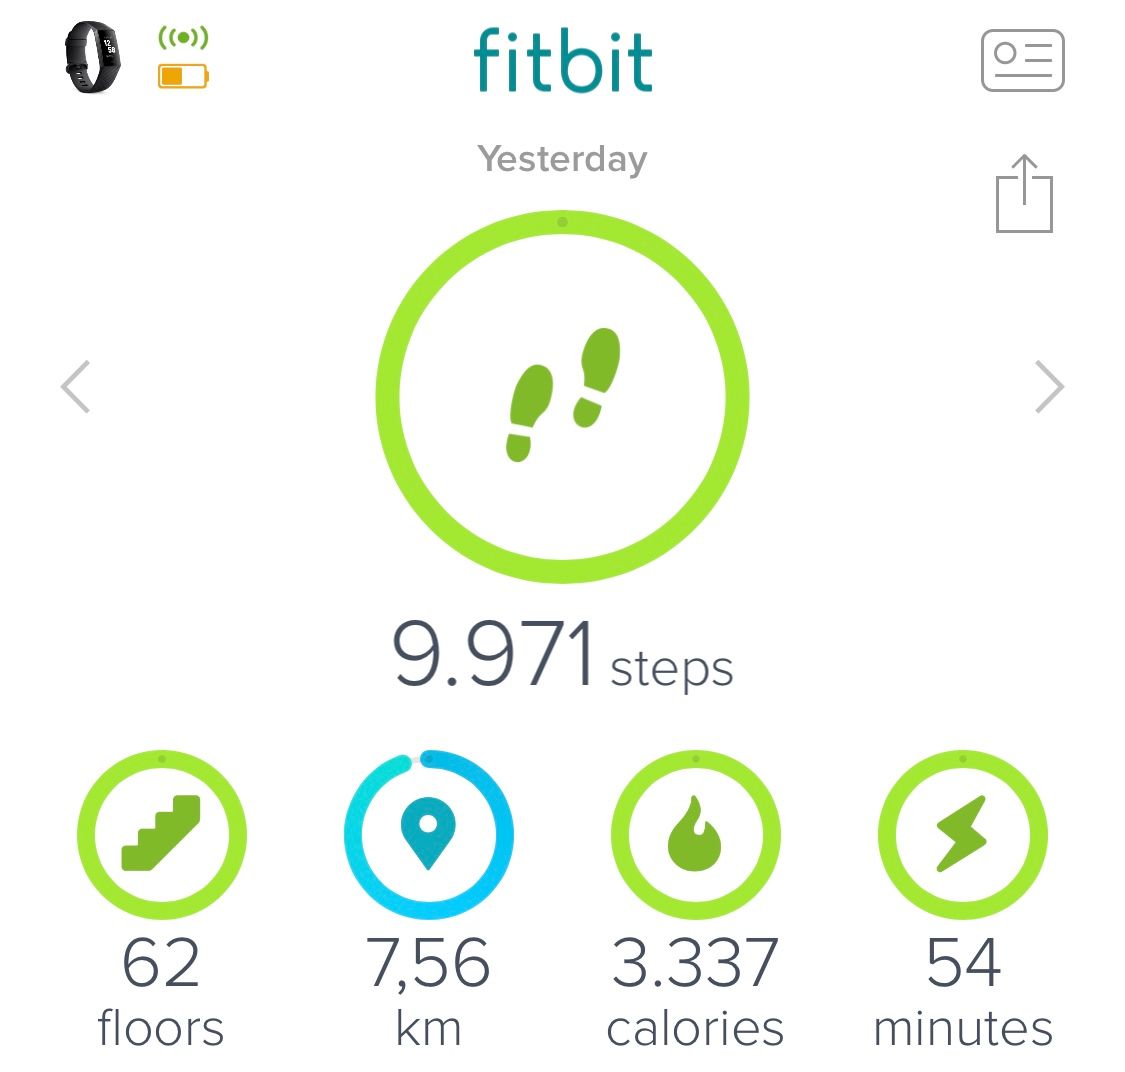 Charge 3 floor count too high - Fitbit 